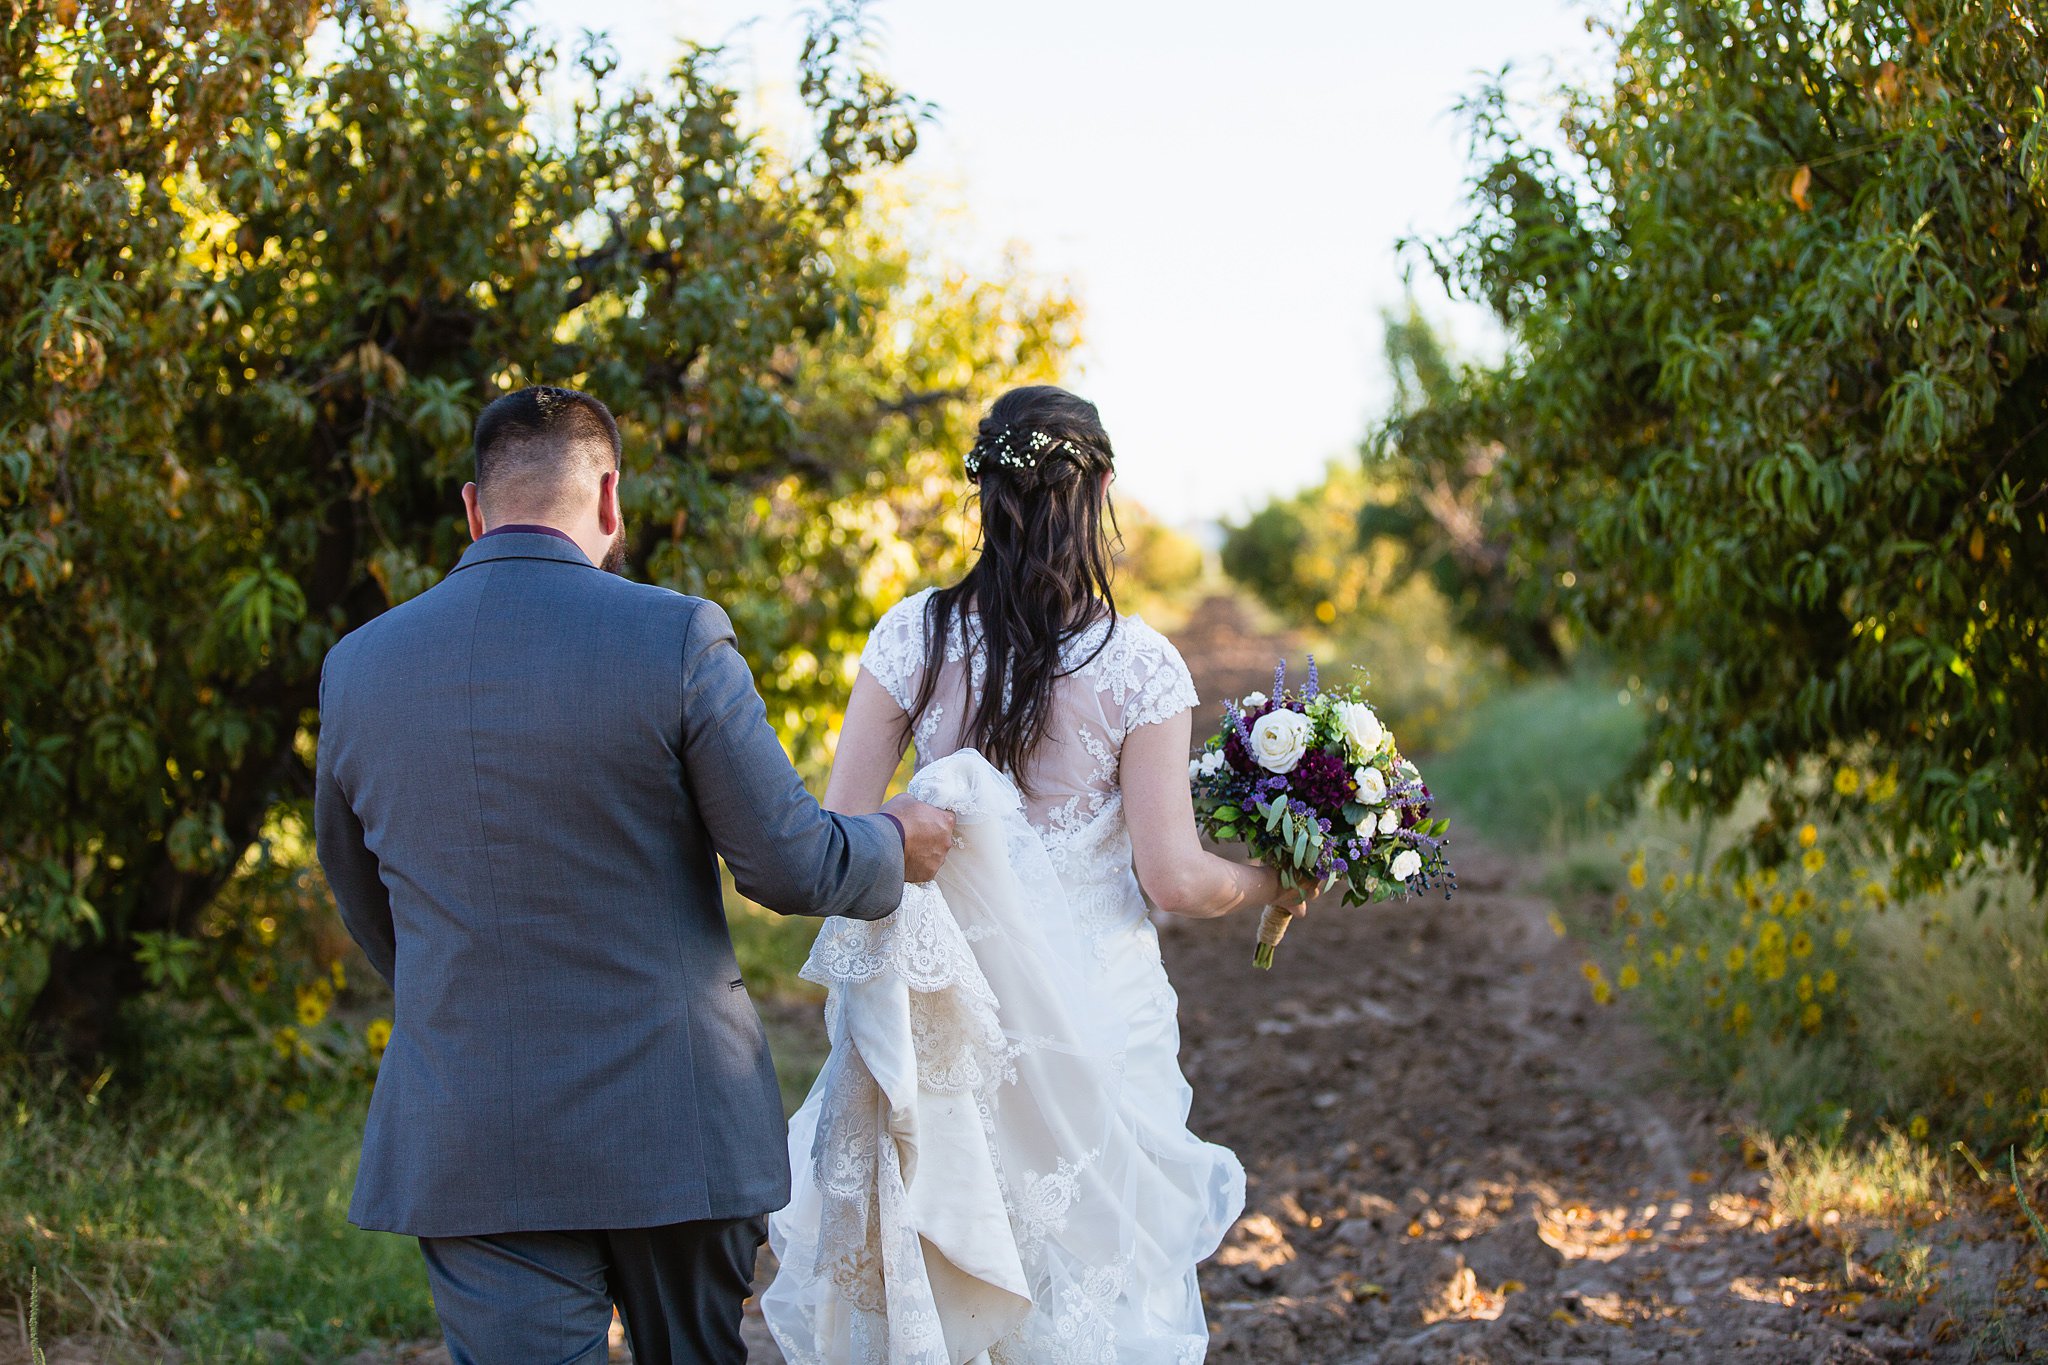 Groom helping bride walk through the orchard at the Farmhouse at Schnepf Farms by Phoenix wedding photographer PMA Photography.